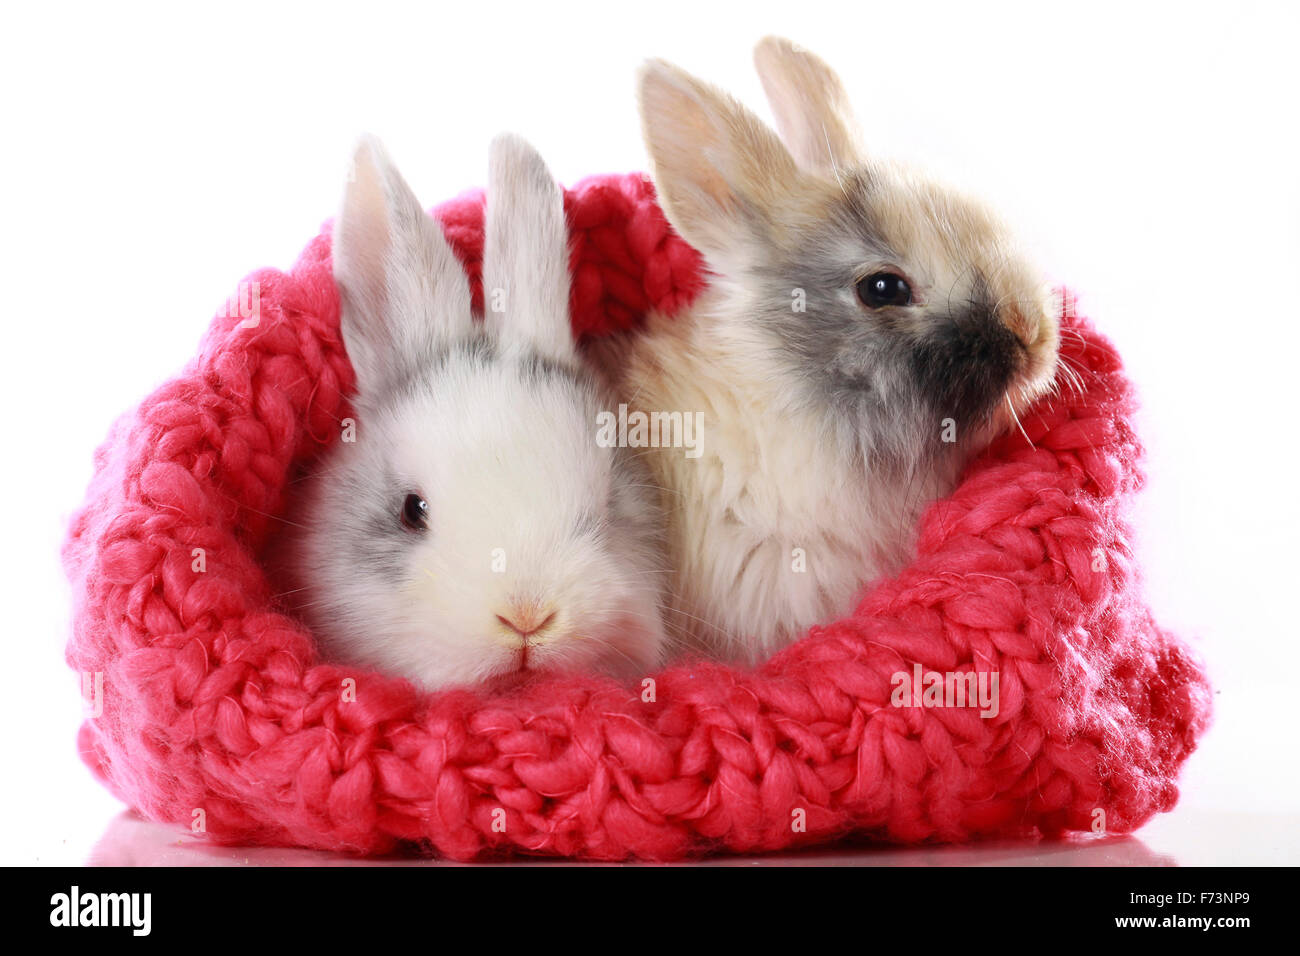 Dwarf rabbit. Two rabbits in a red wool cap. Studio picture against a white background Stock Photo